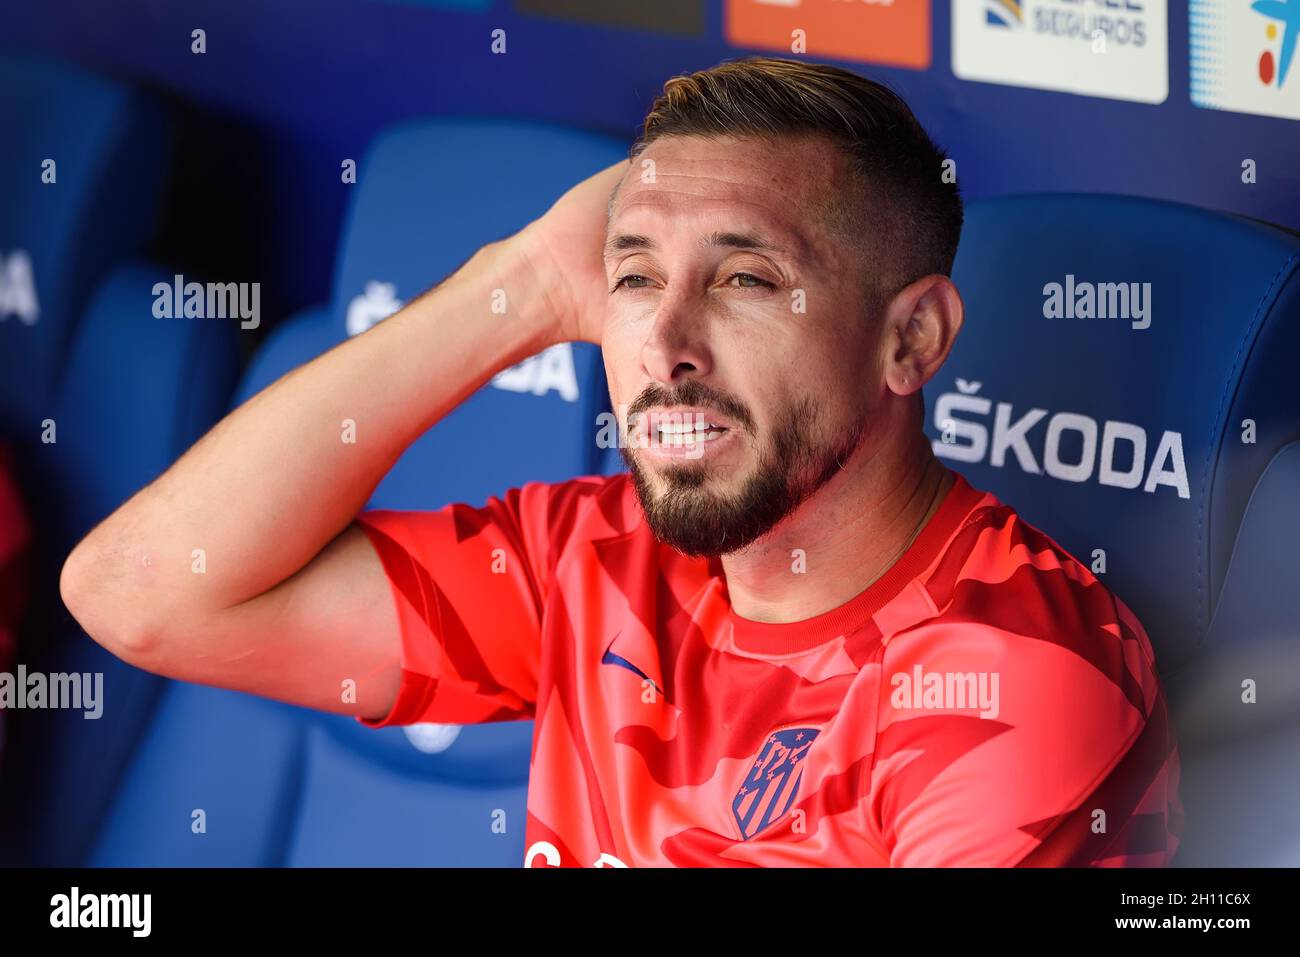 BARCELONA - SEP 12: Hector Herrera sits on the bench during the La Liga match between RCD Espanyol and Atletico de Madrid CF at the RCDE Stadium on Se Stock Photo